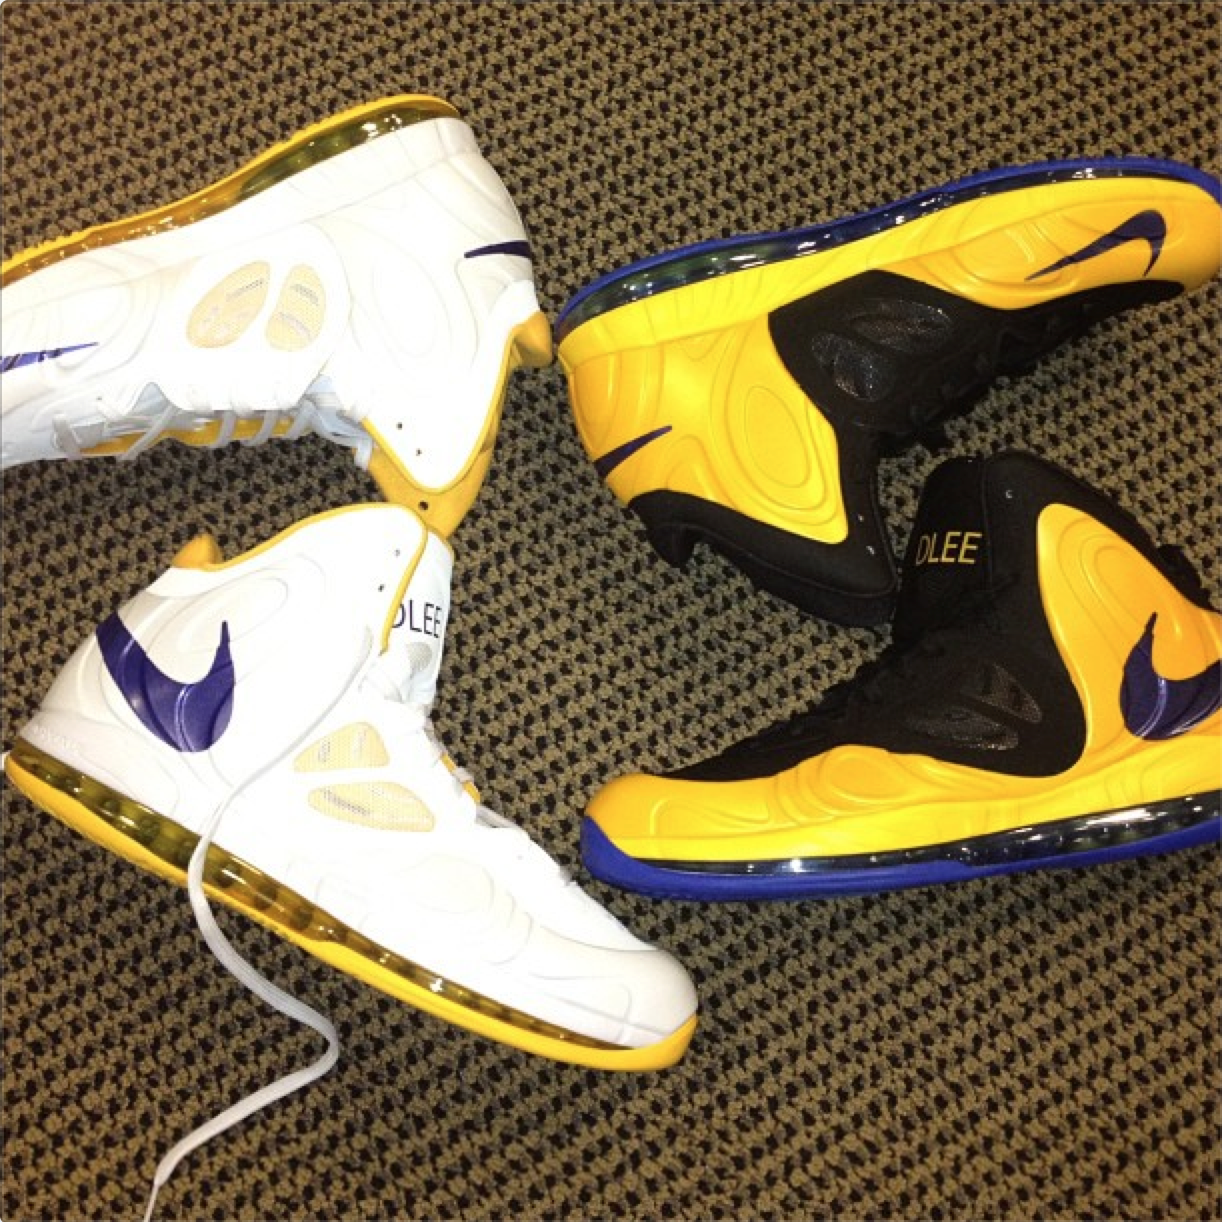 Nike Air Max Hyperposite 'Home' and 'Away' David Lee PEs